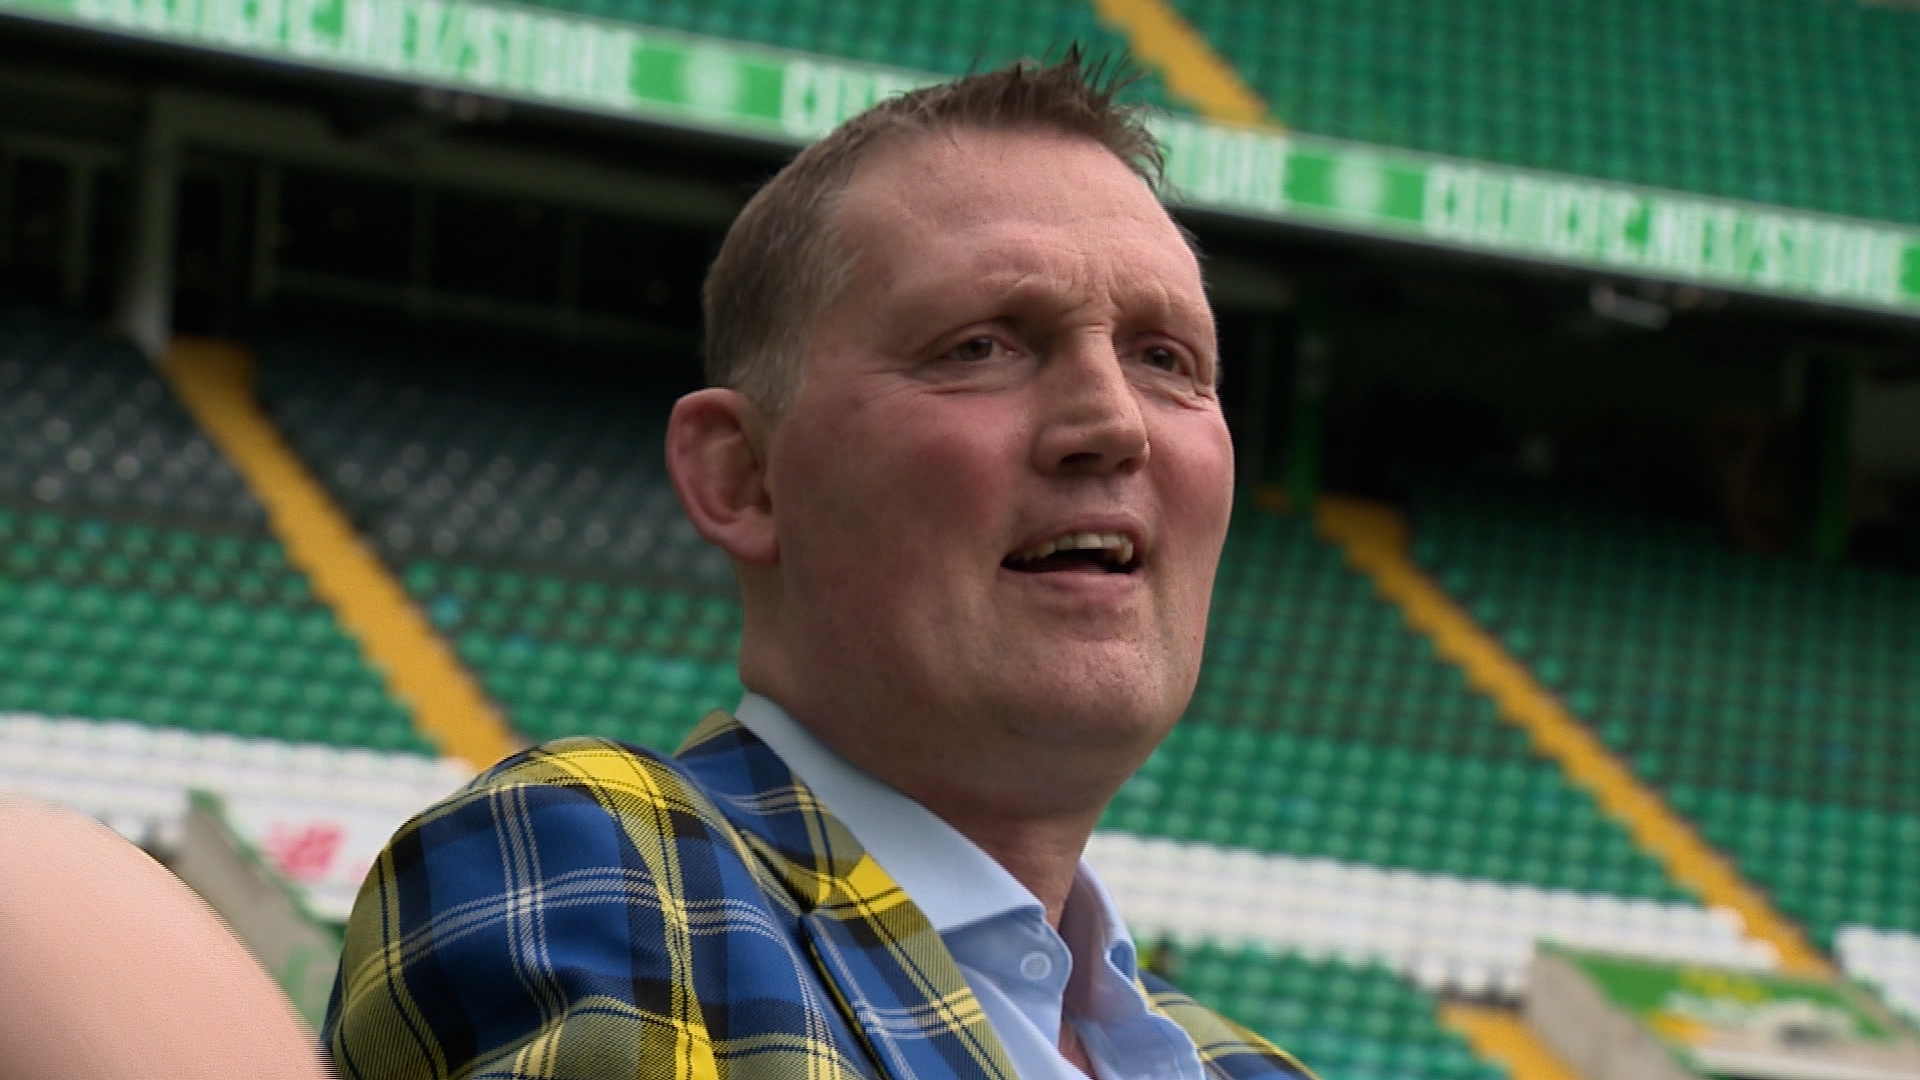 Doddie Weir has often shared his inspirational fight with Motor Neurone Disease.